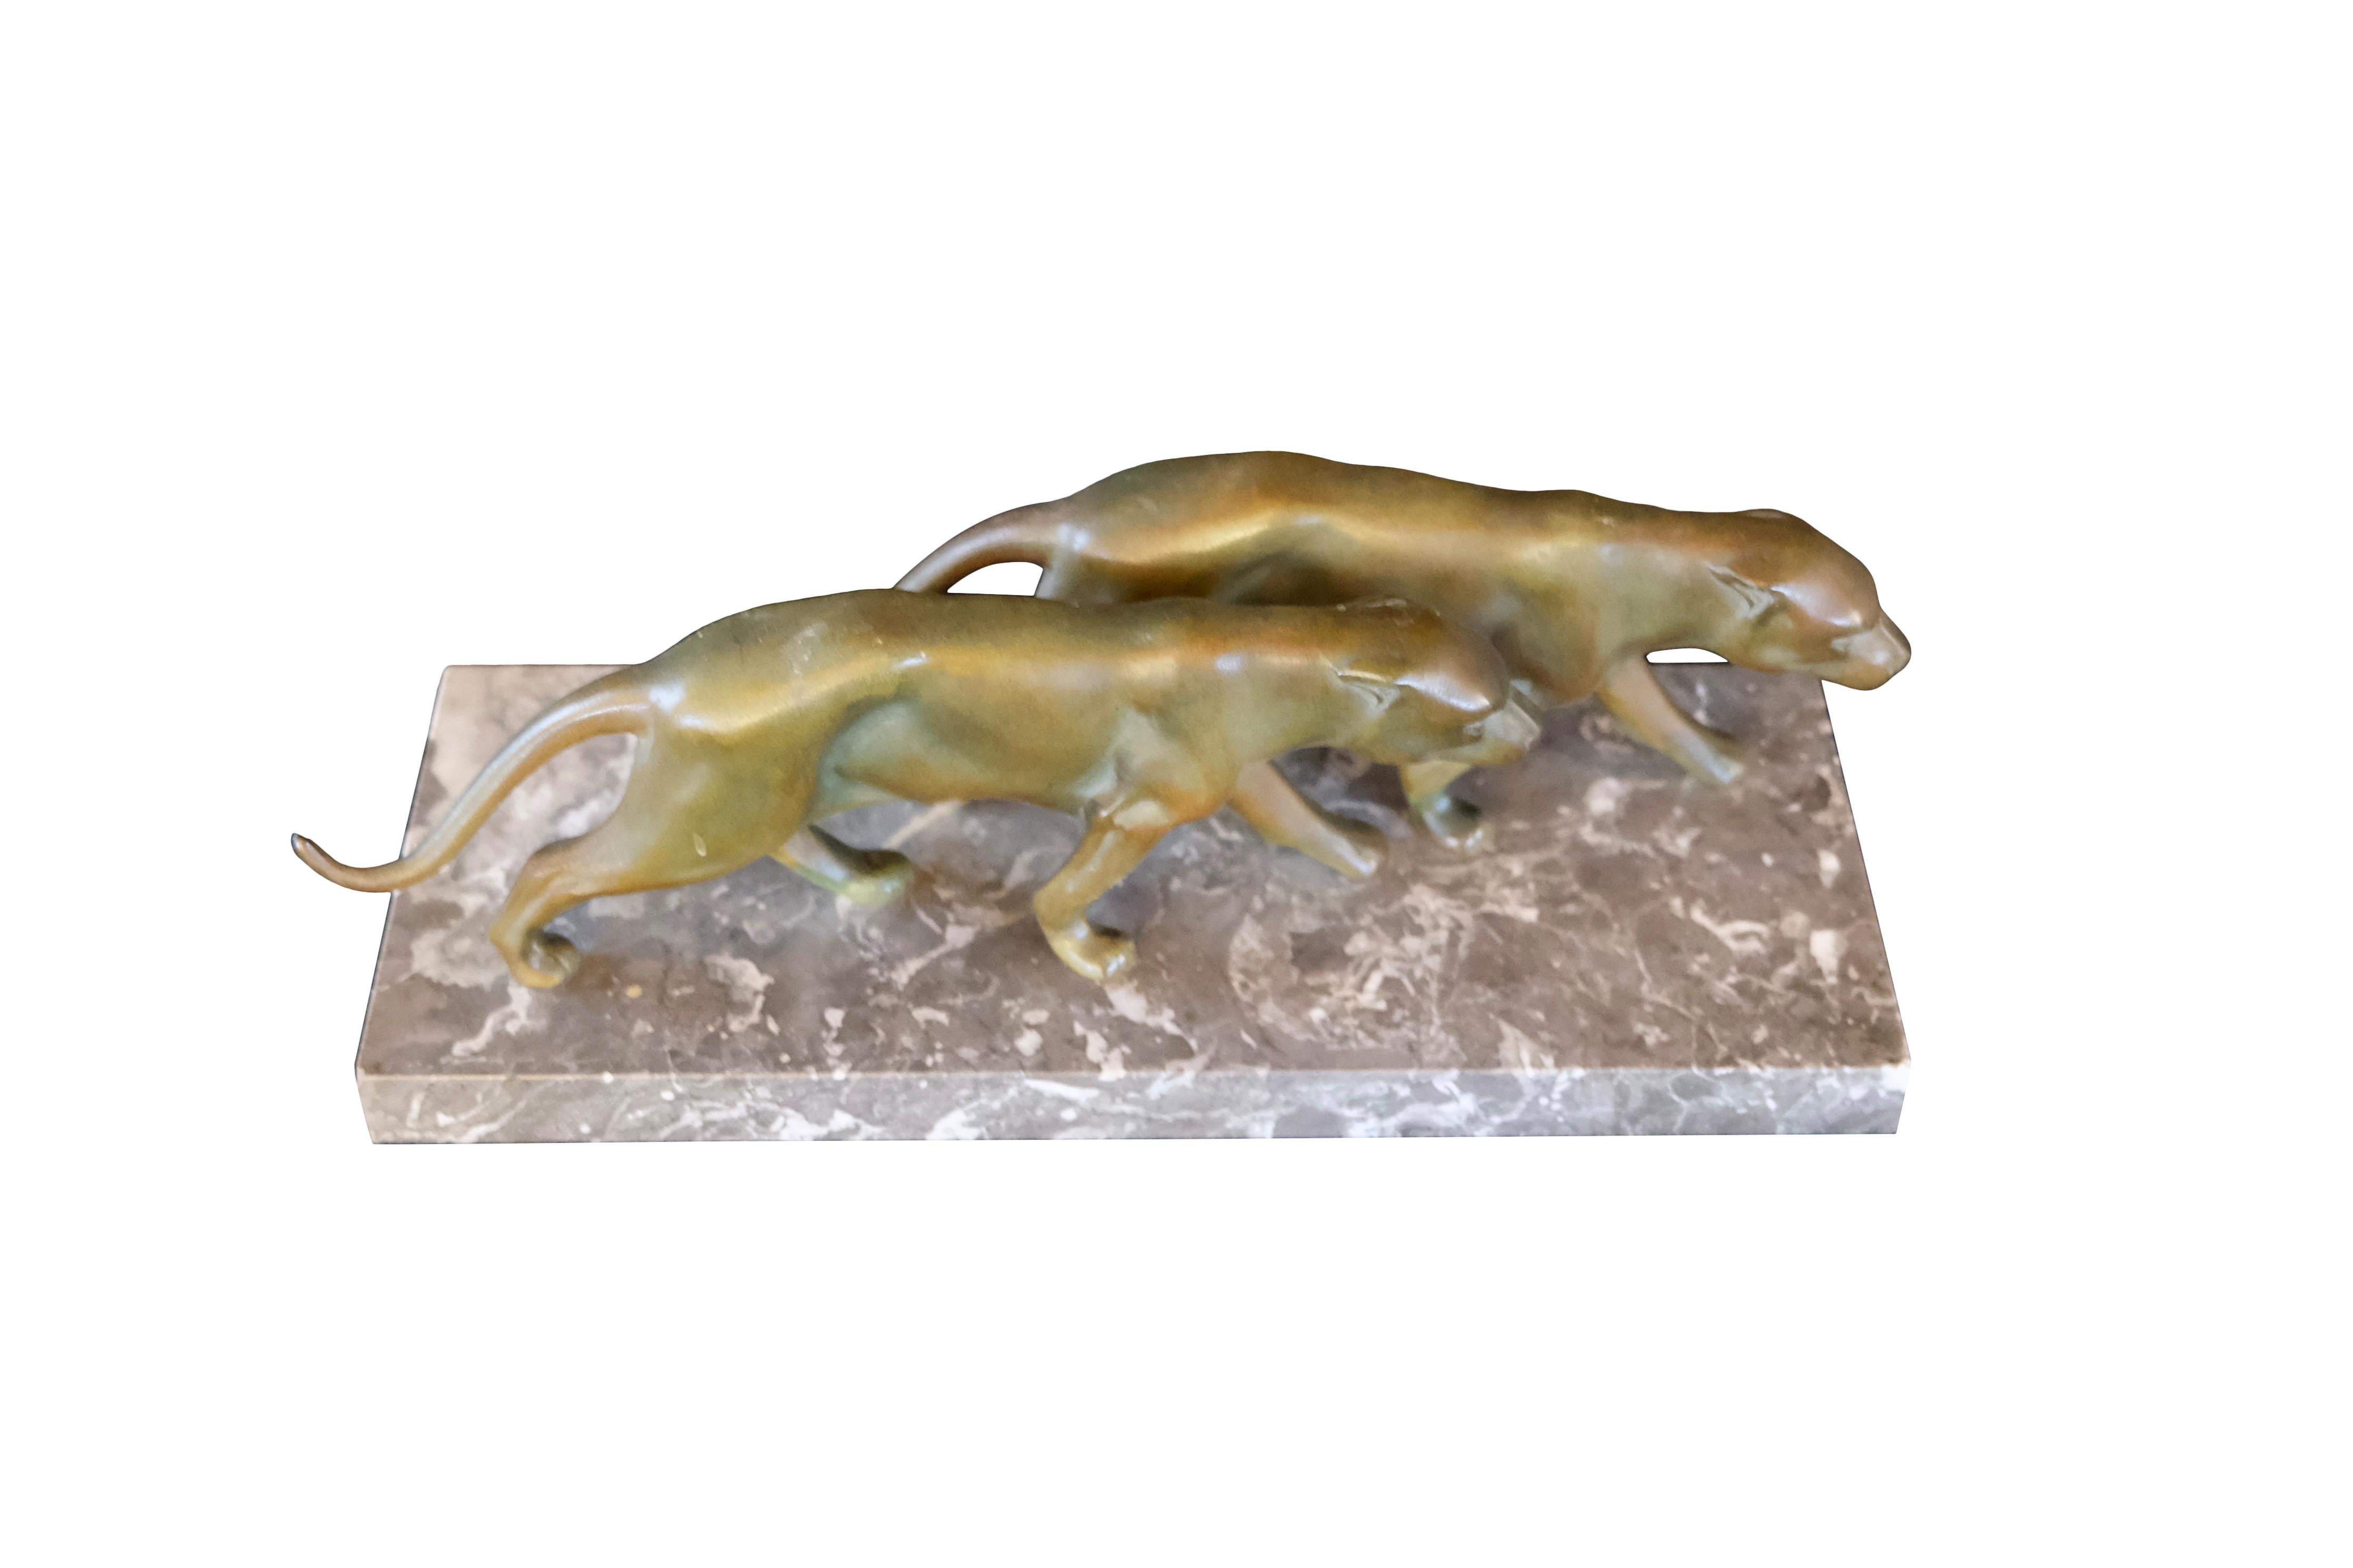 Two walking panthers 
Spelter sculpture on a marble base 

Original Art Deco, France, 1930s 
Original Patina

Dimensions: 
Width 40 cm
Height 15 cm
Depth 16 cm.